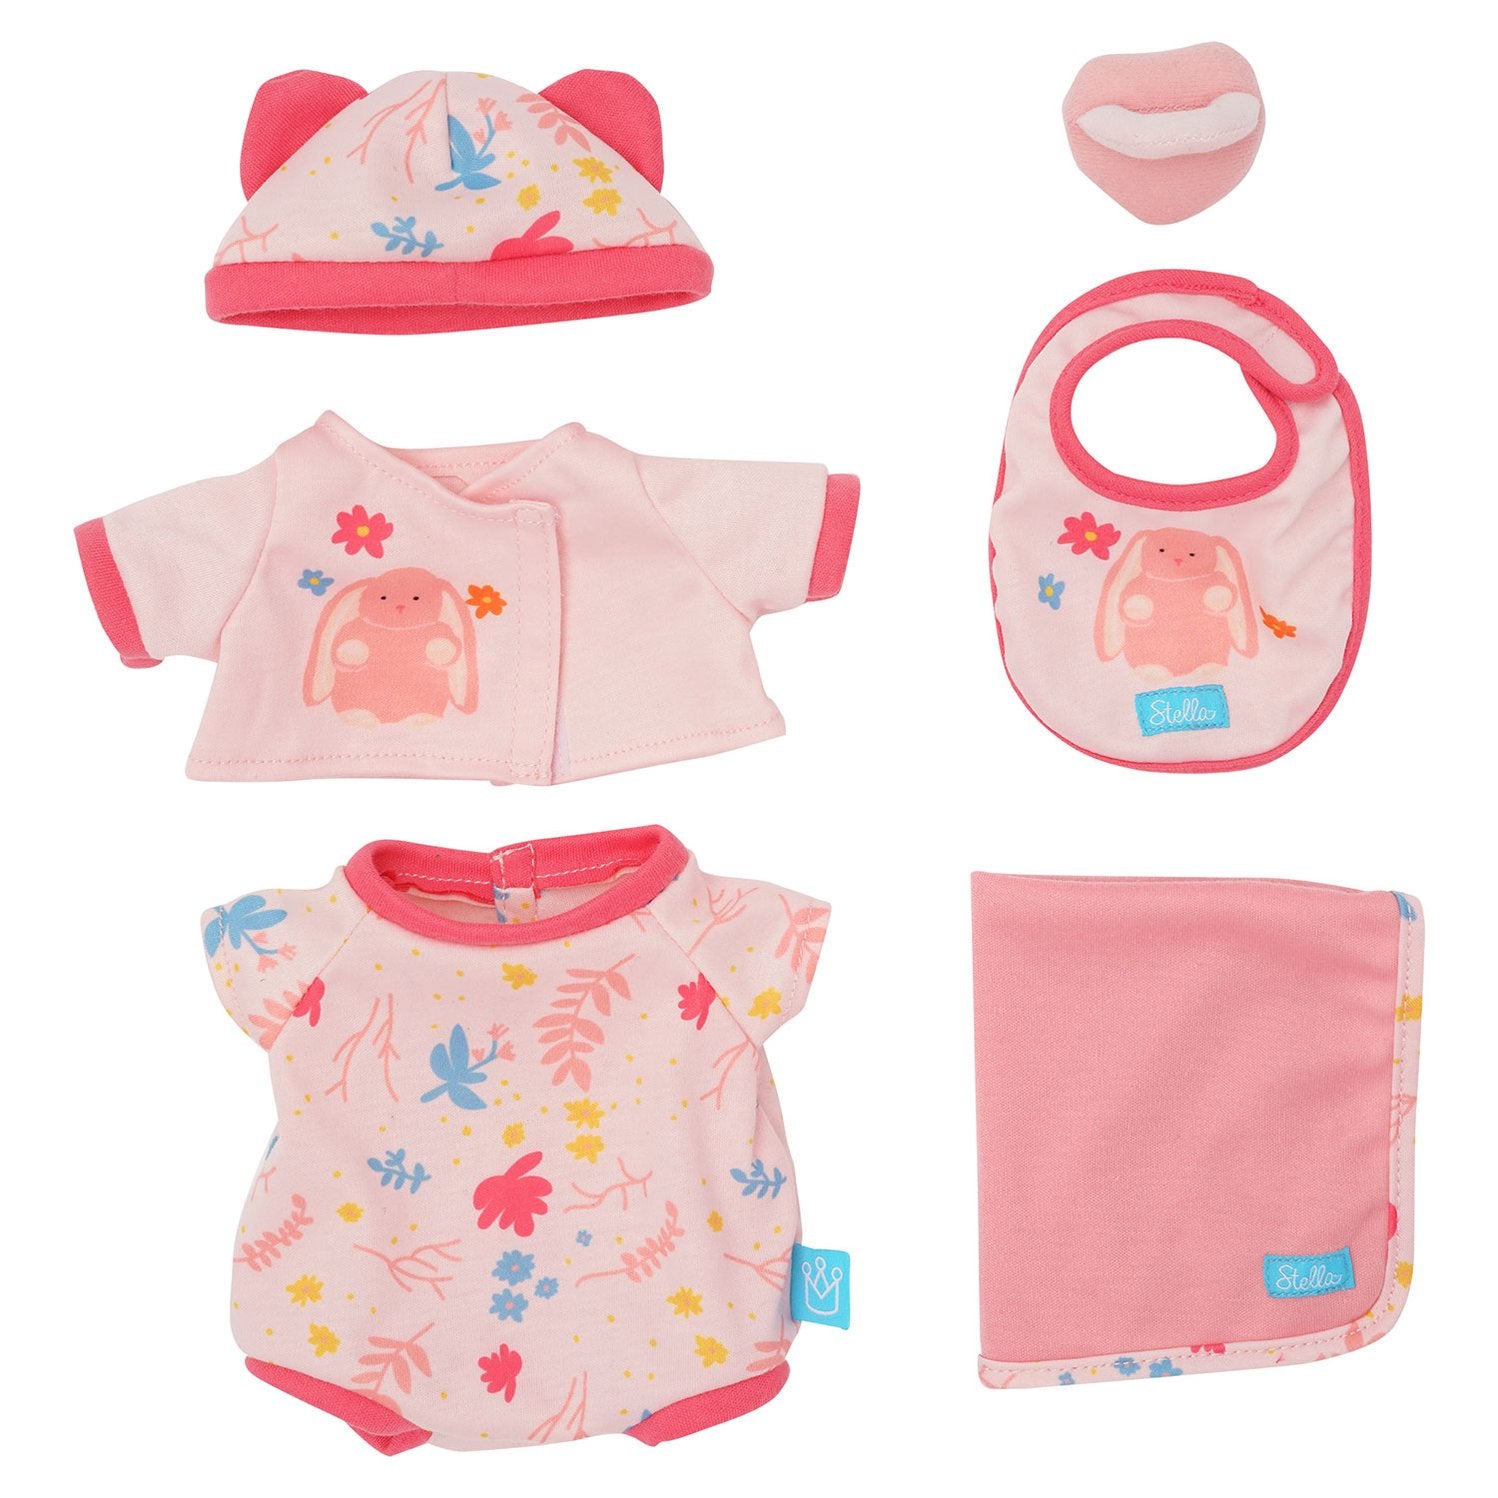 Birth Set S00 - New - For Baby